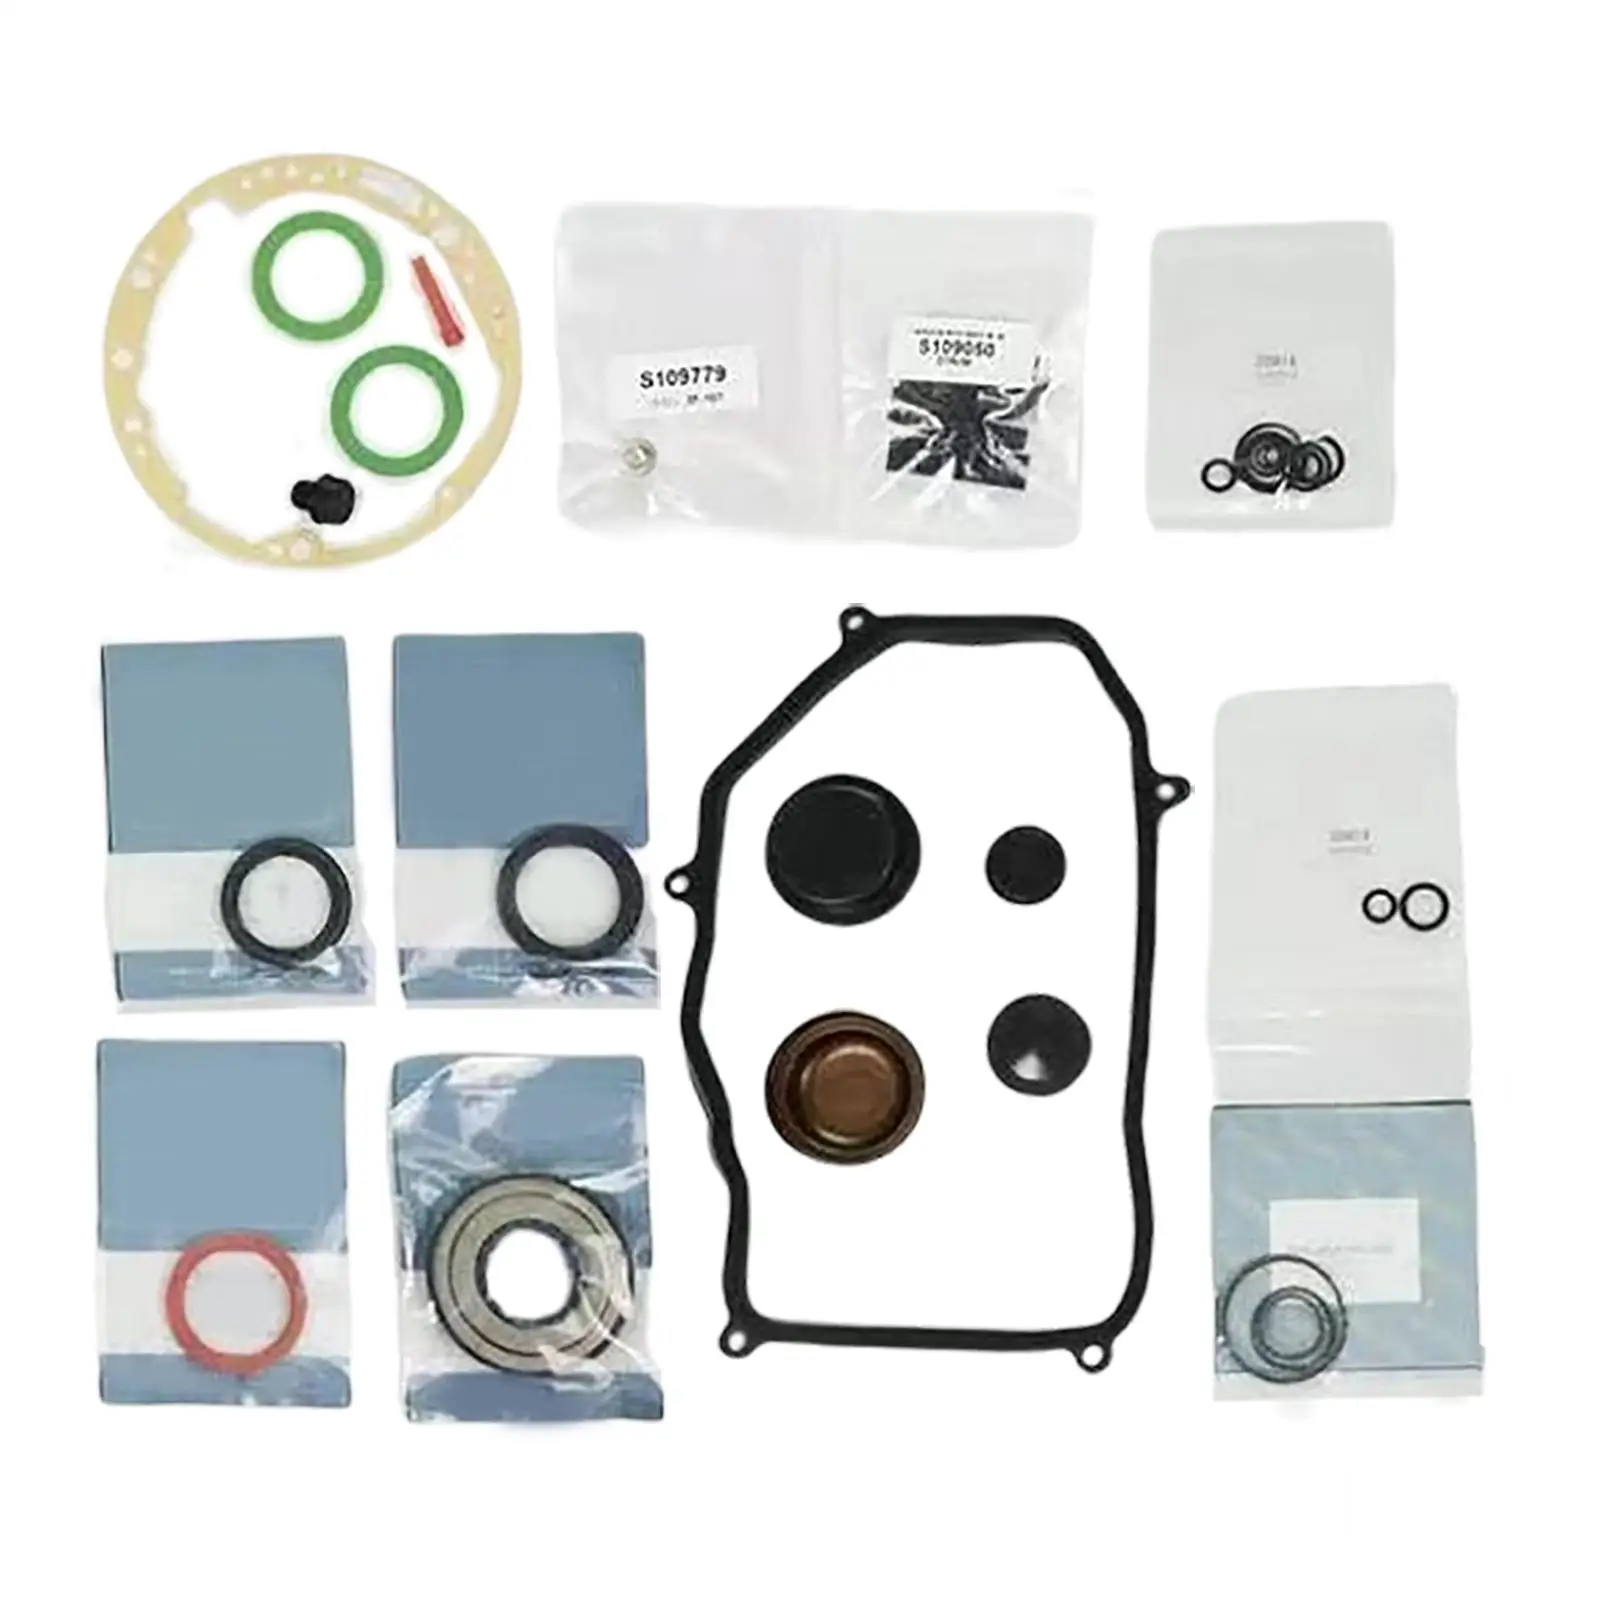 Automatic 01M 4 Speed Transmission Seal Rebuild Kit Equipment Metal Replacement for VW Trans MK4 MK3 01M 398 001 Auto Parts